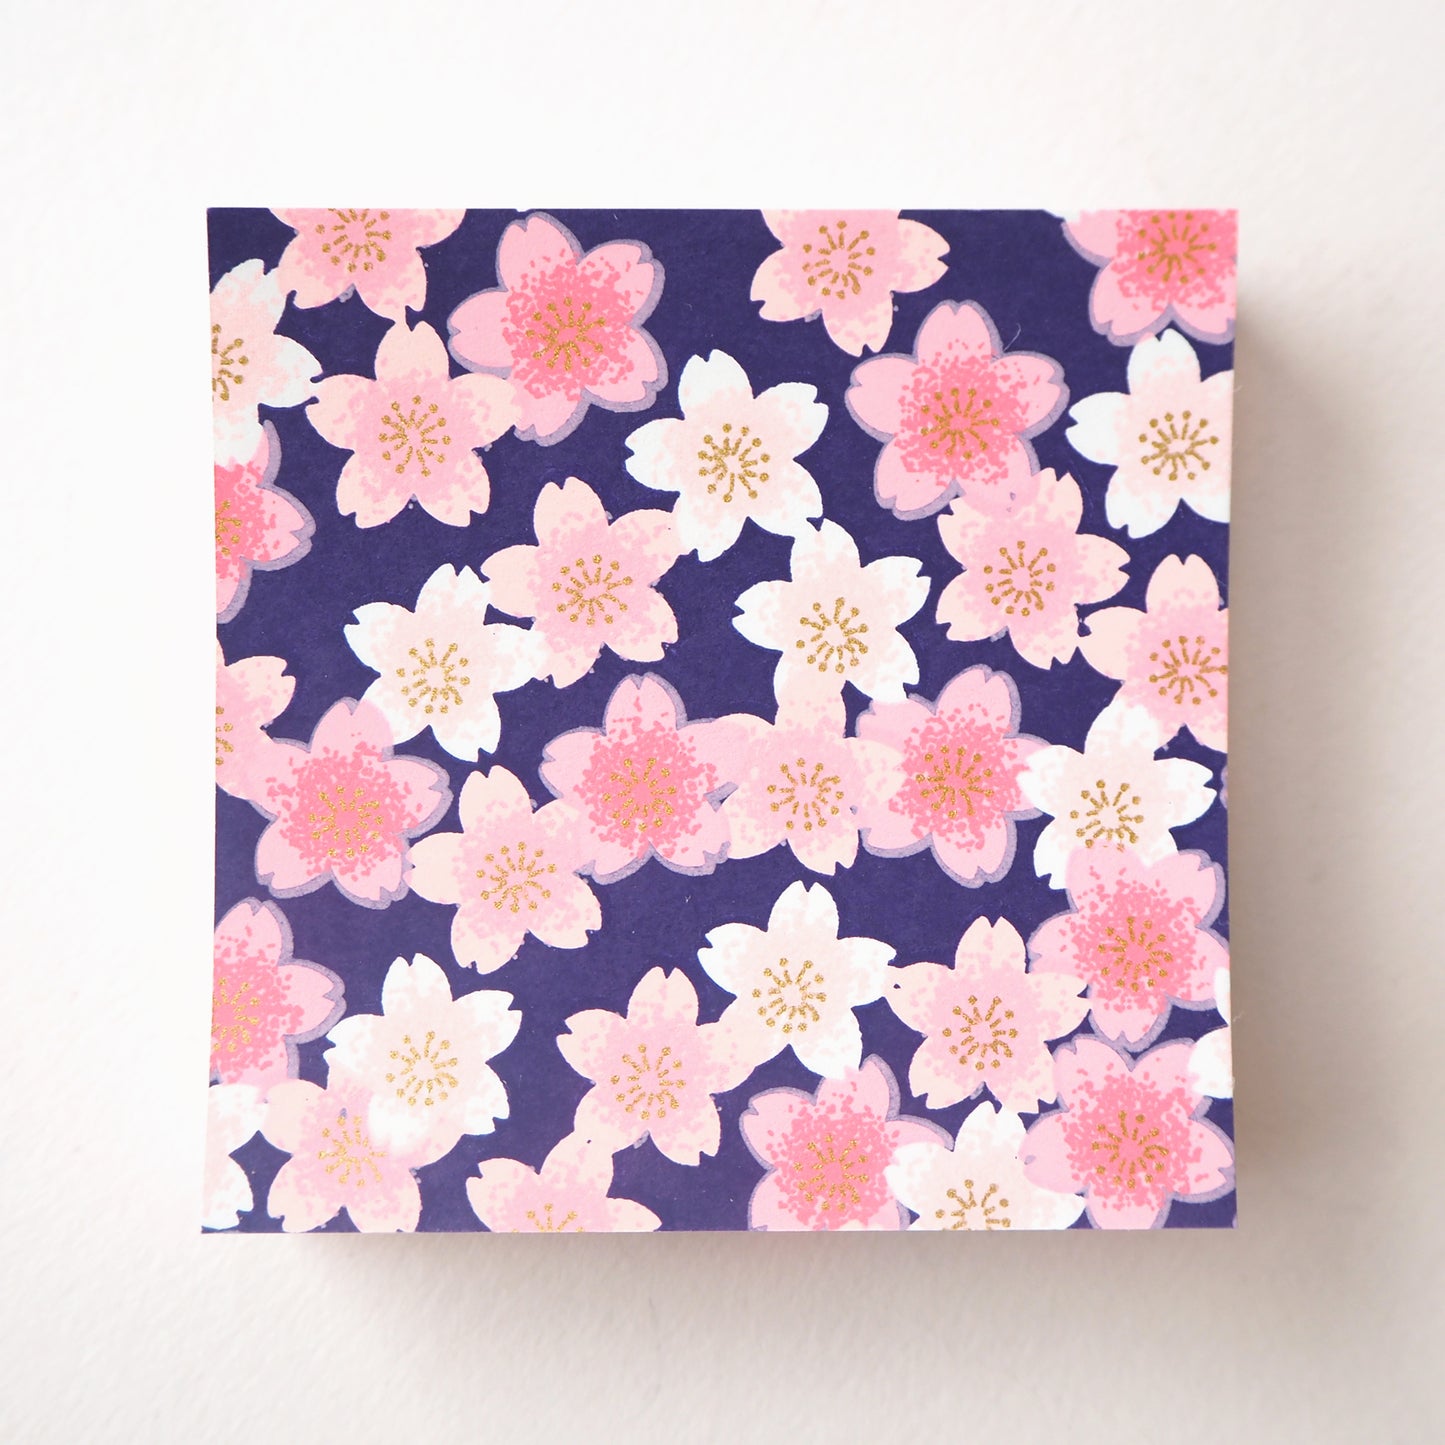 Pack of 100 Sheets 7x7cm Yuzen Washi Origami Paper HZ-505 - Pink Shades Cherry Blossom Navy - washi paper - Lavender Home London